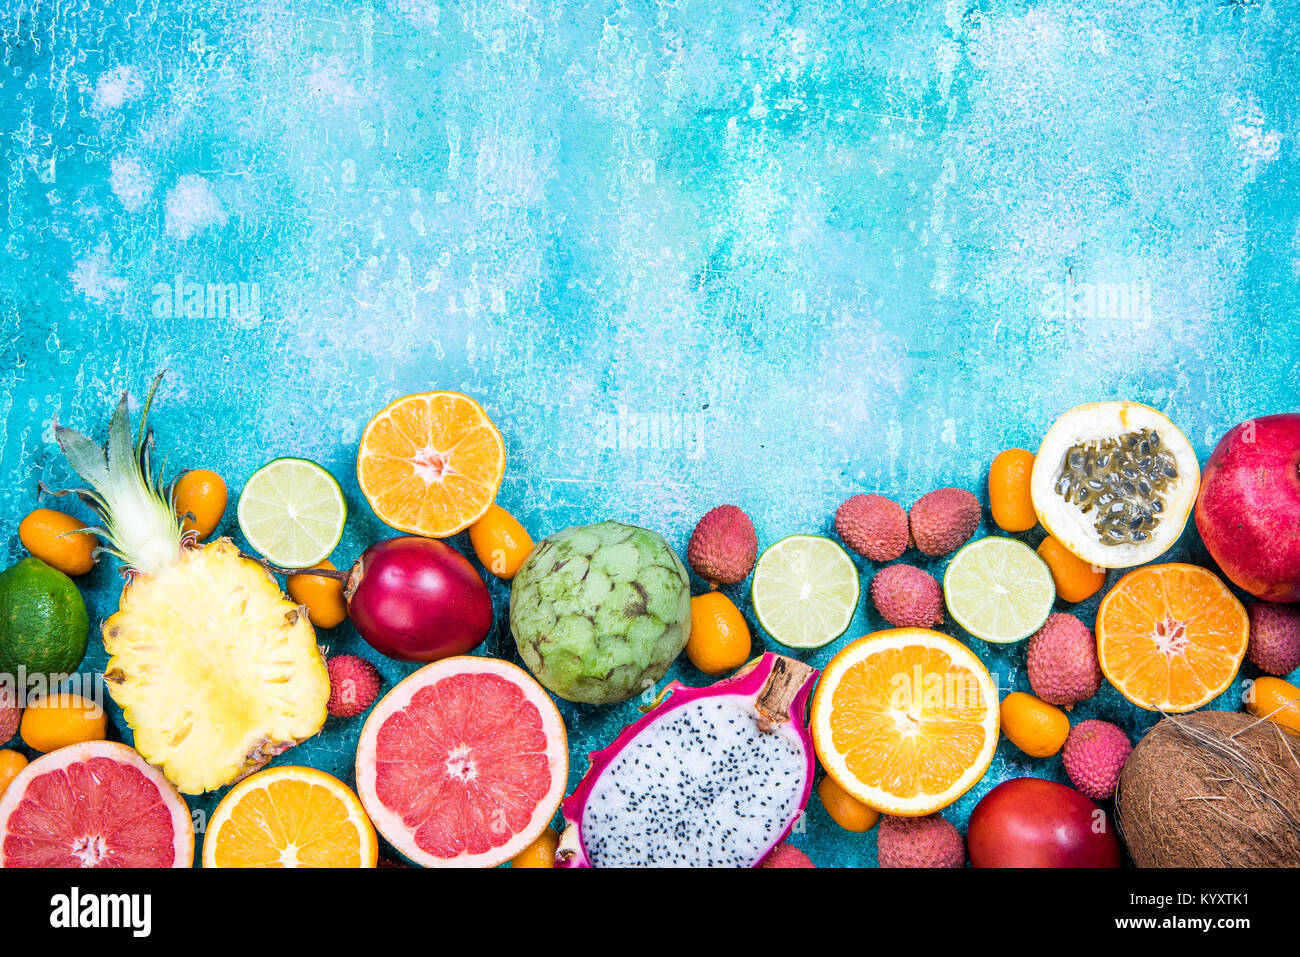 https://c8.alamy.com/comp/KYXTK1/mixed-fresh-vibrant-exotic-fruits-border-background-top-viewcopy-space-KYXTK1.jpg